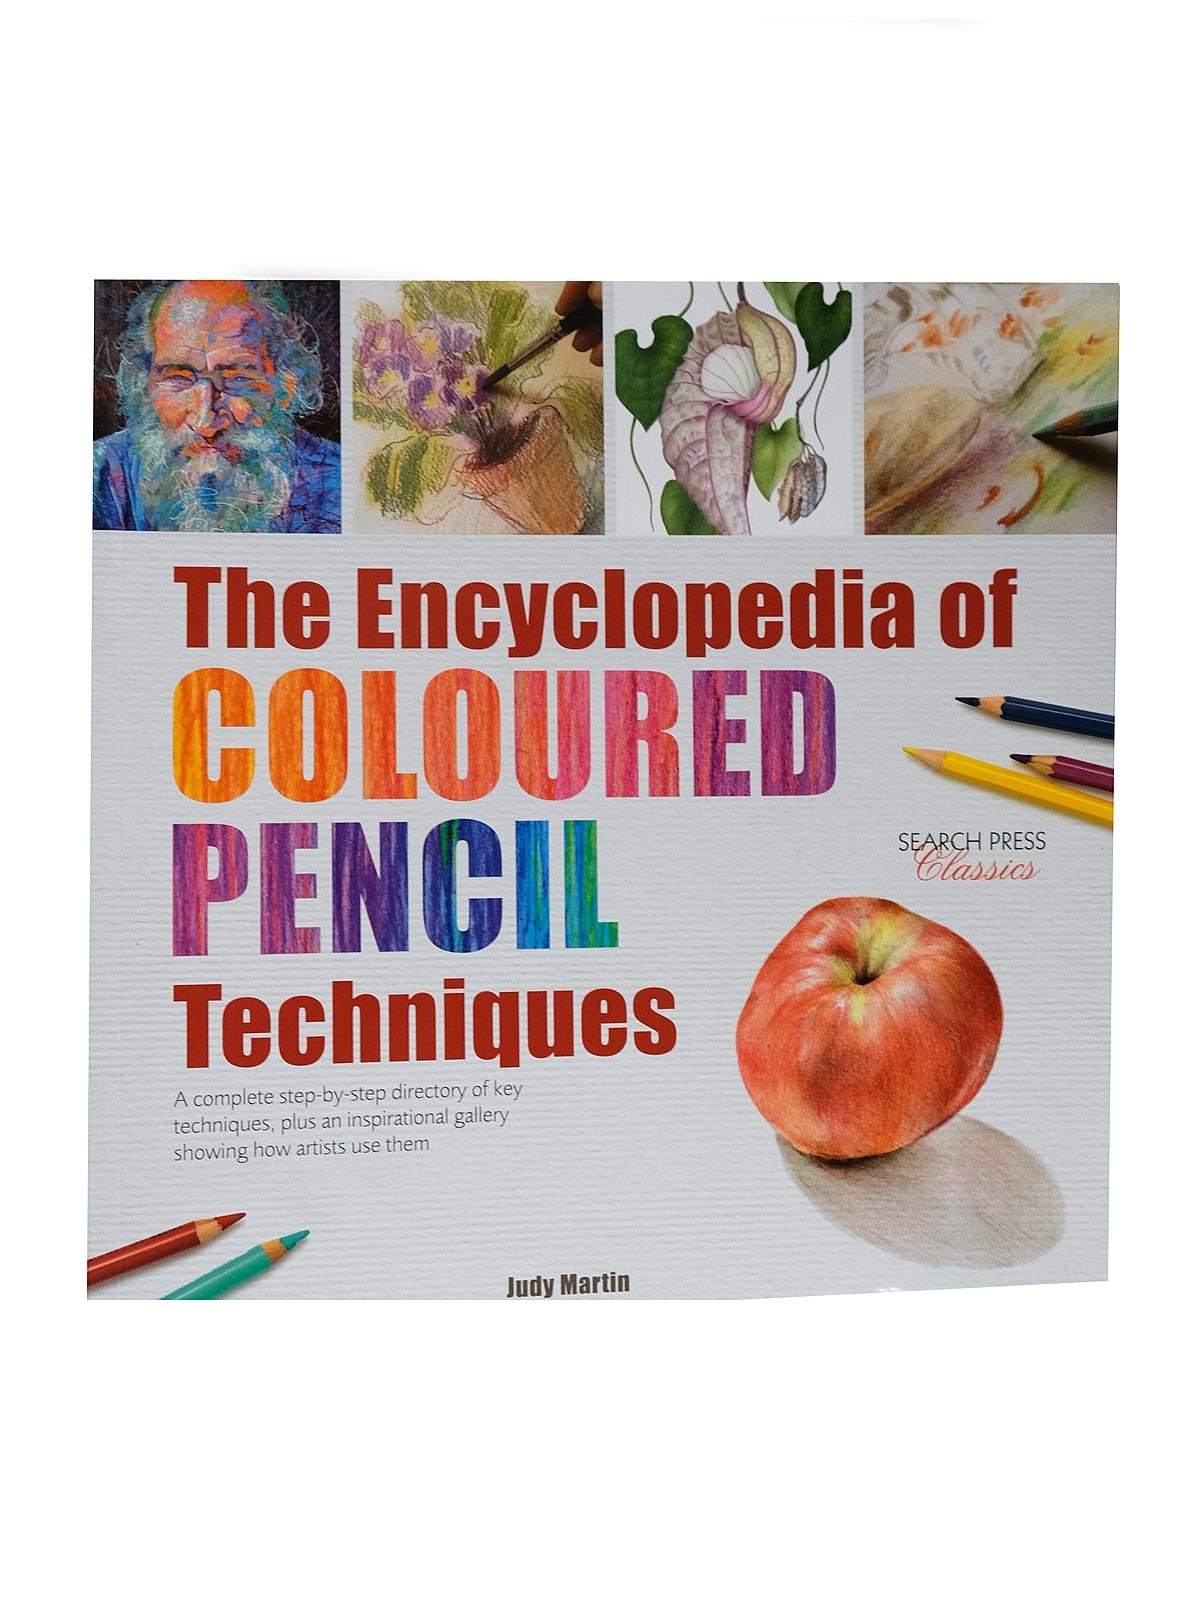 Search Press - The Encyclopedia of Coloured Pencil Techniques